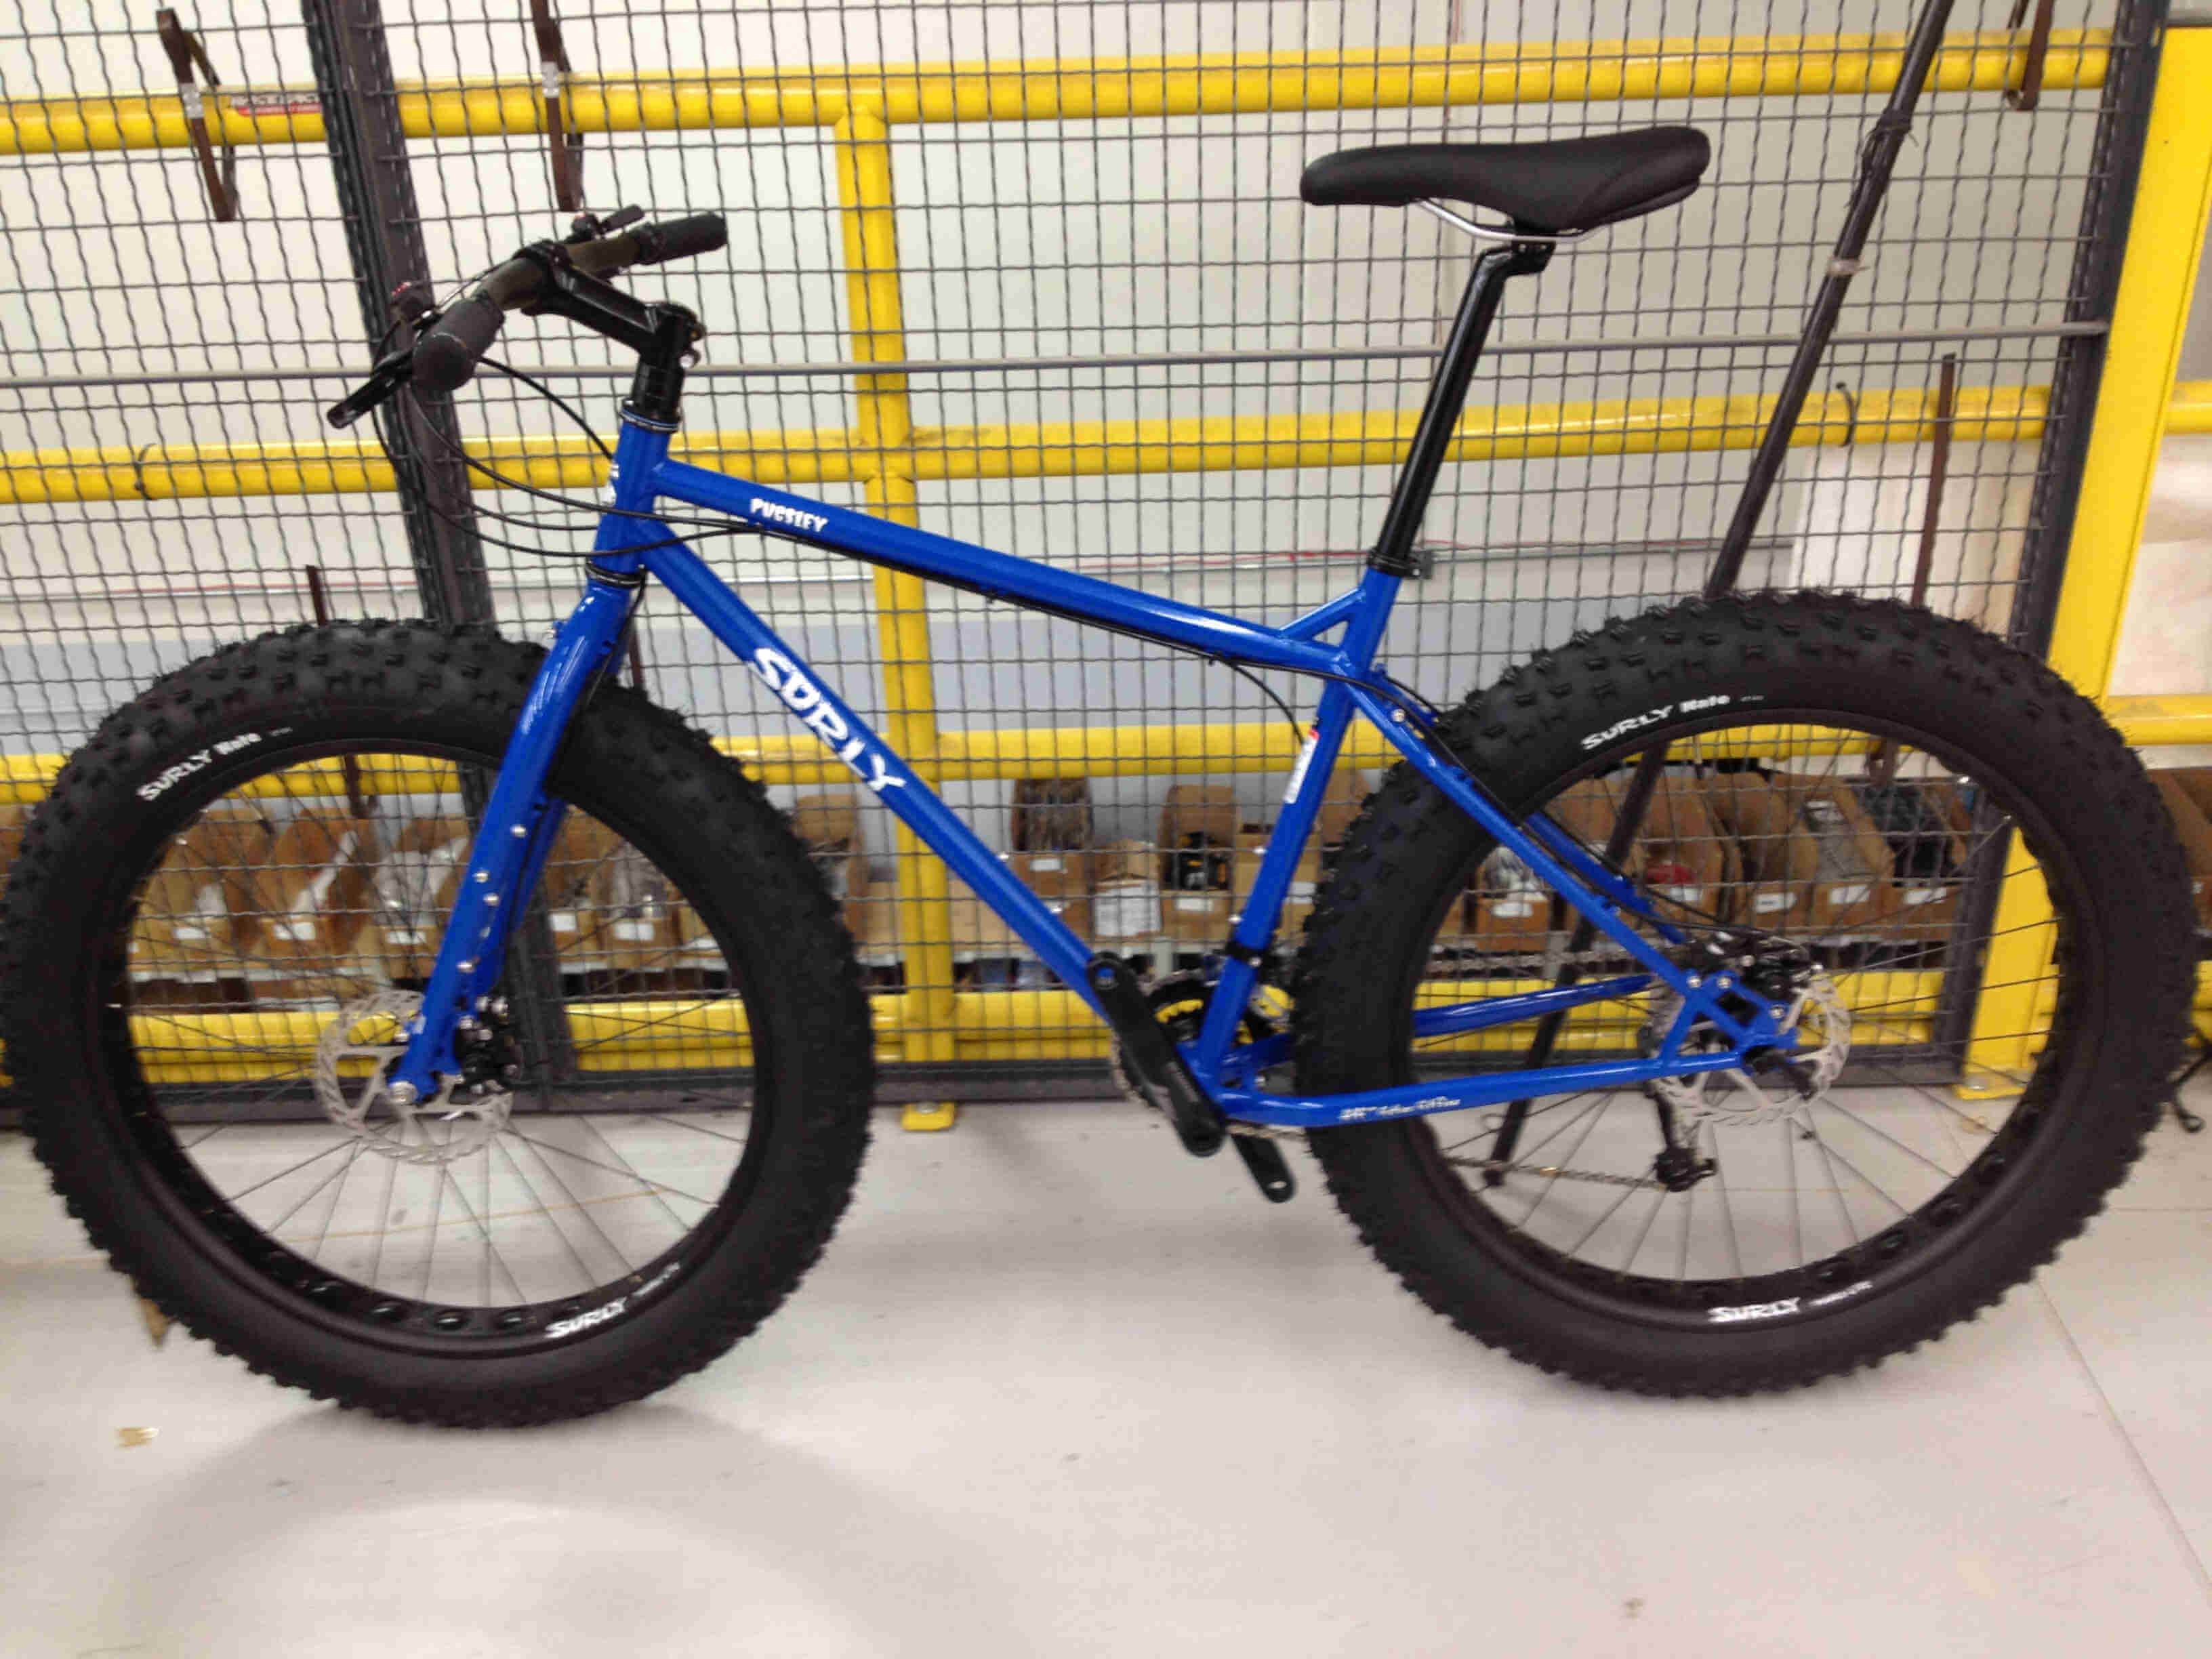 Left side view of a blue Surly Pugsley fat bike, on a concrete warehouse floor, against a wire cage wall